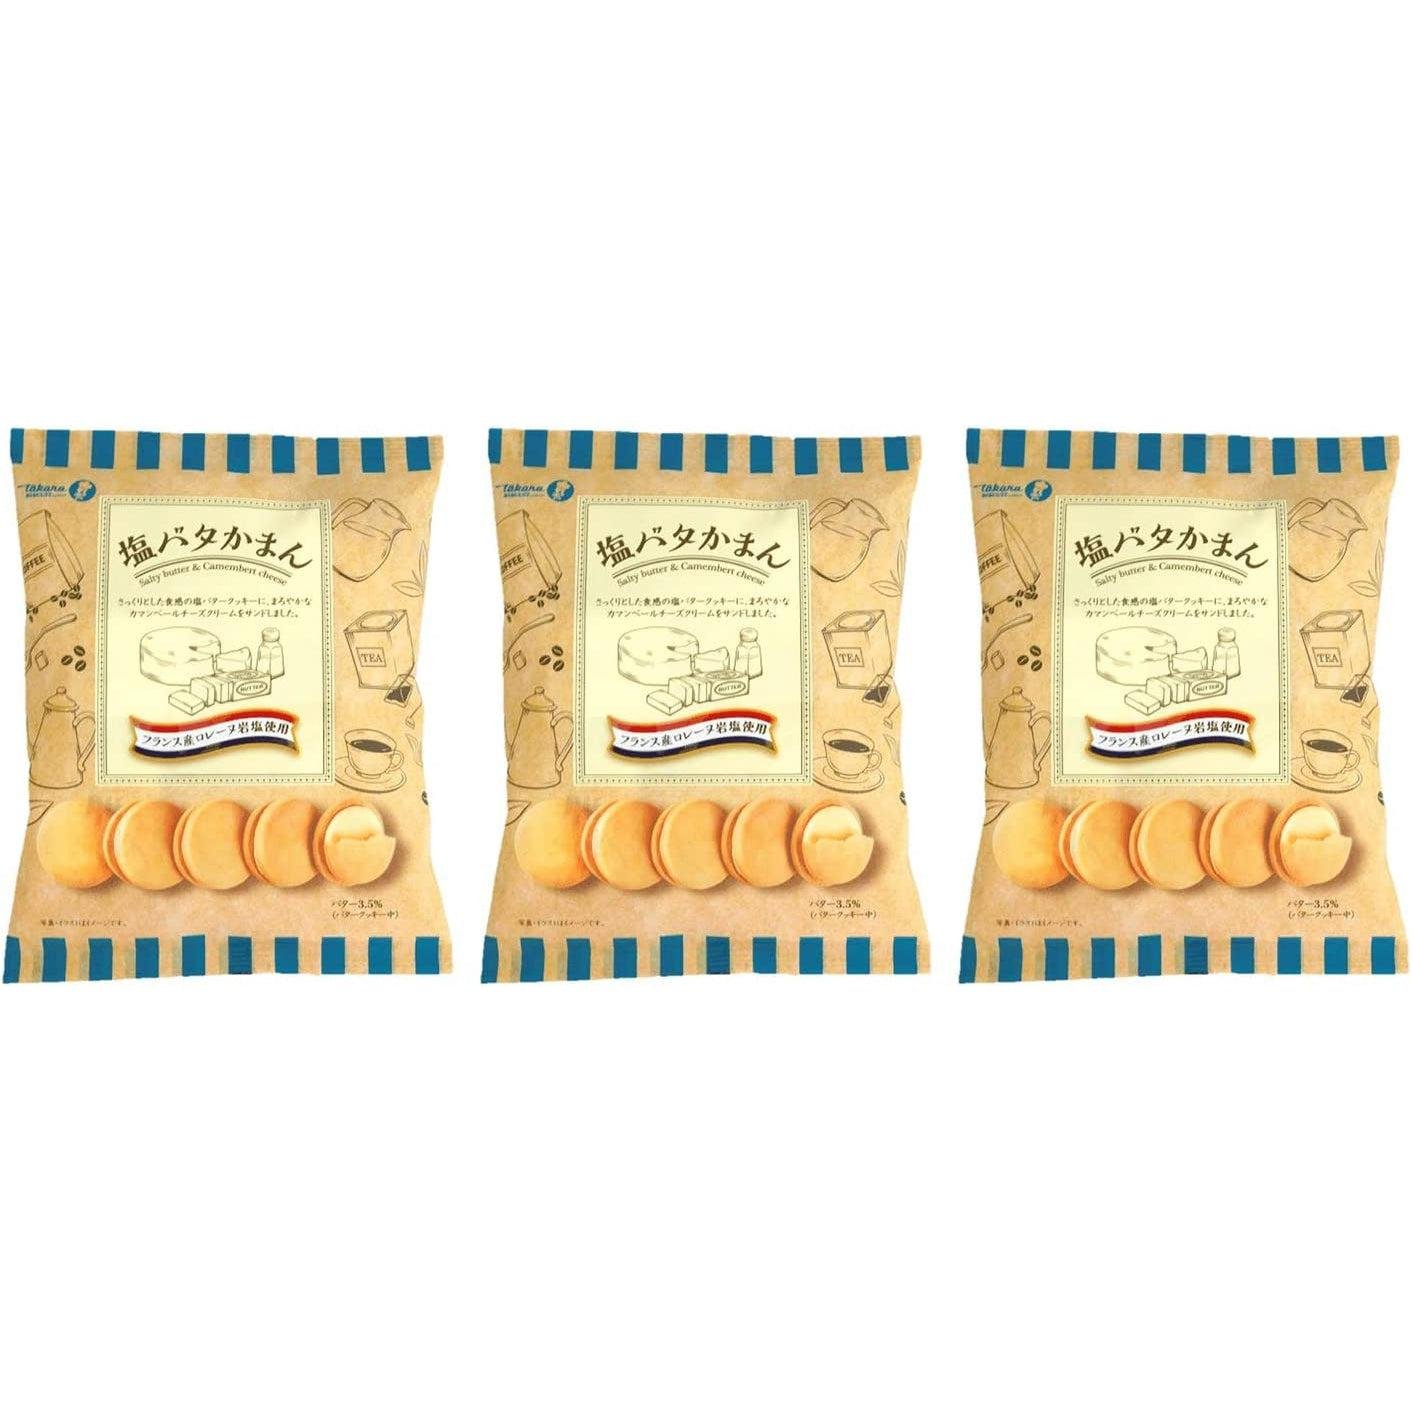 Takara Seika Camembert Cheese Filled Salted Butter Sandwich Biscuits (Pack of 3)